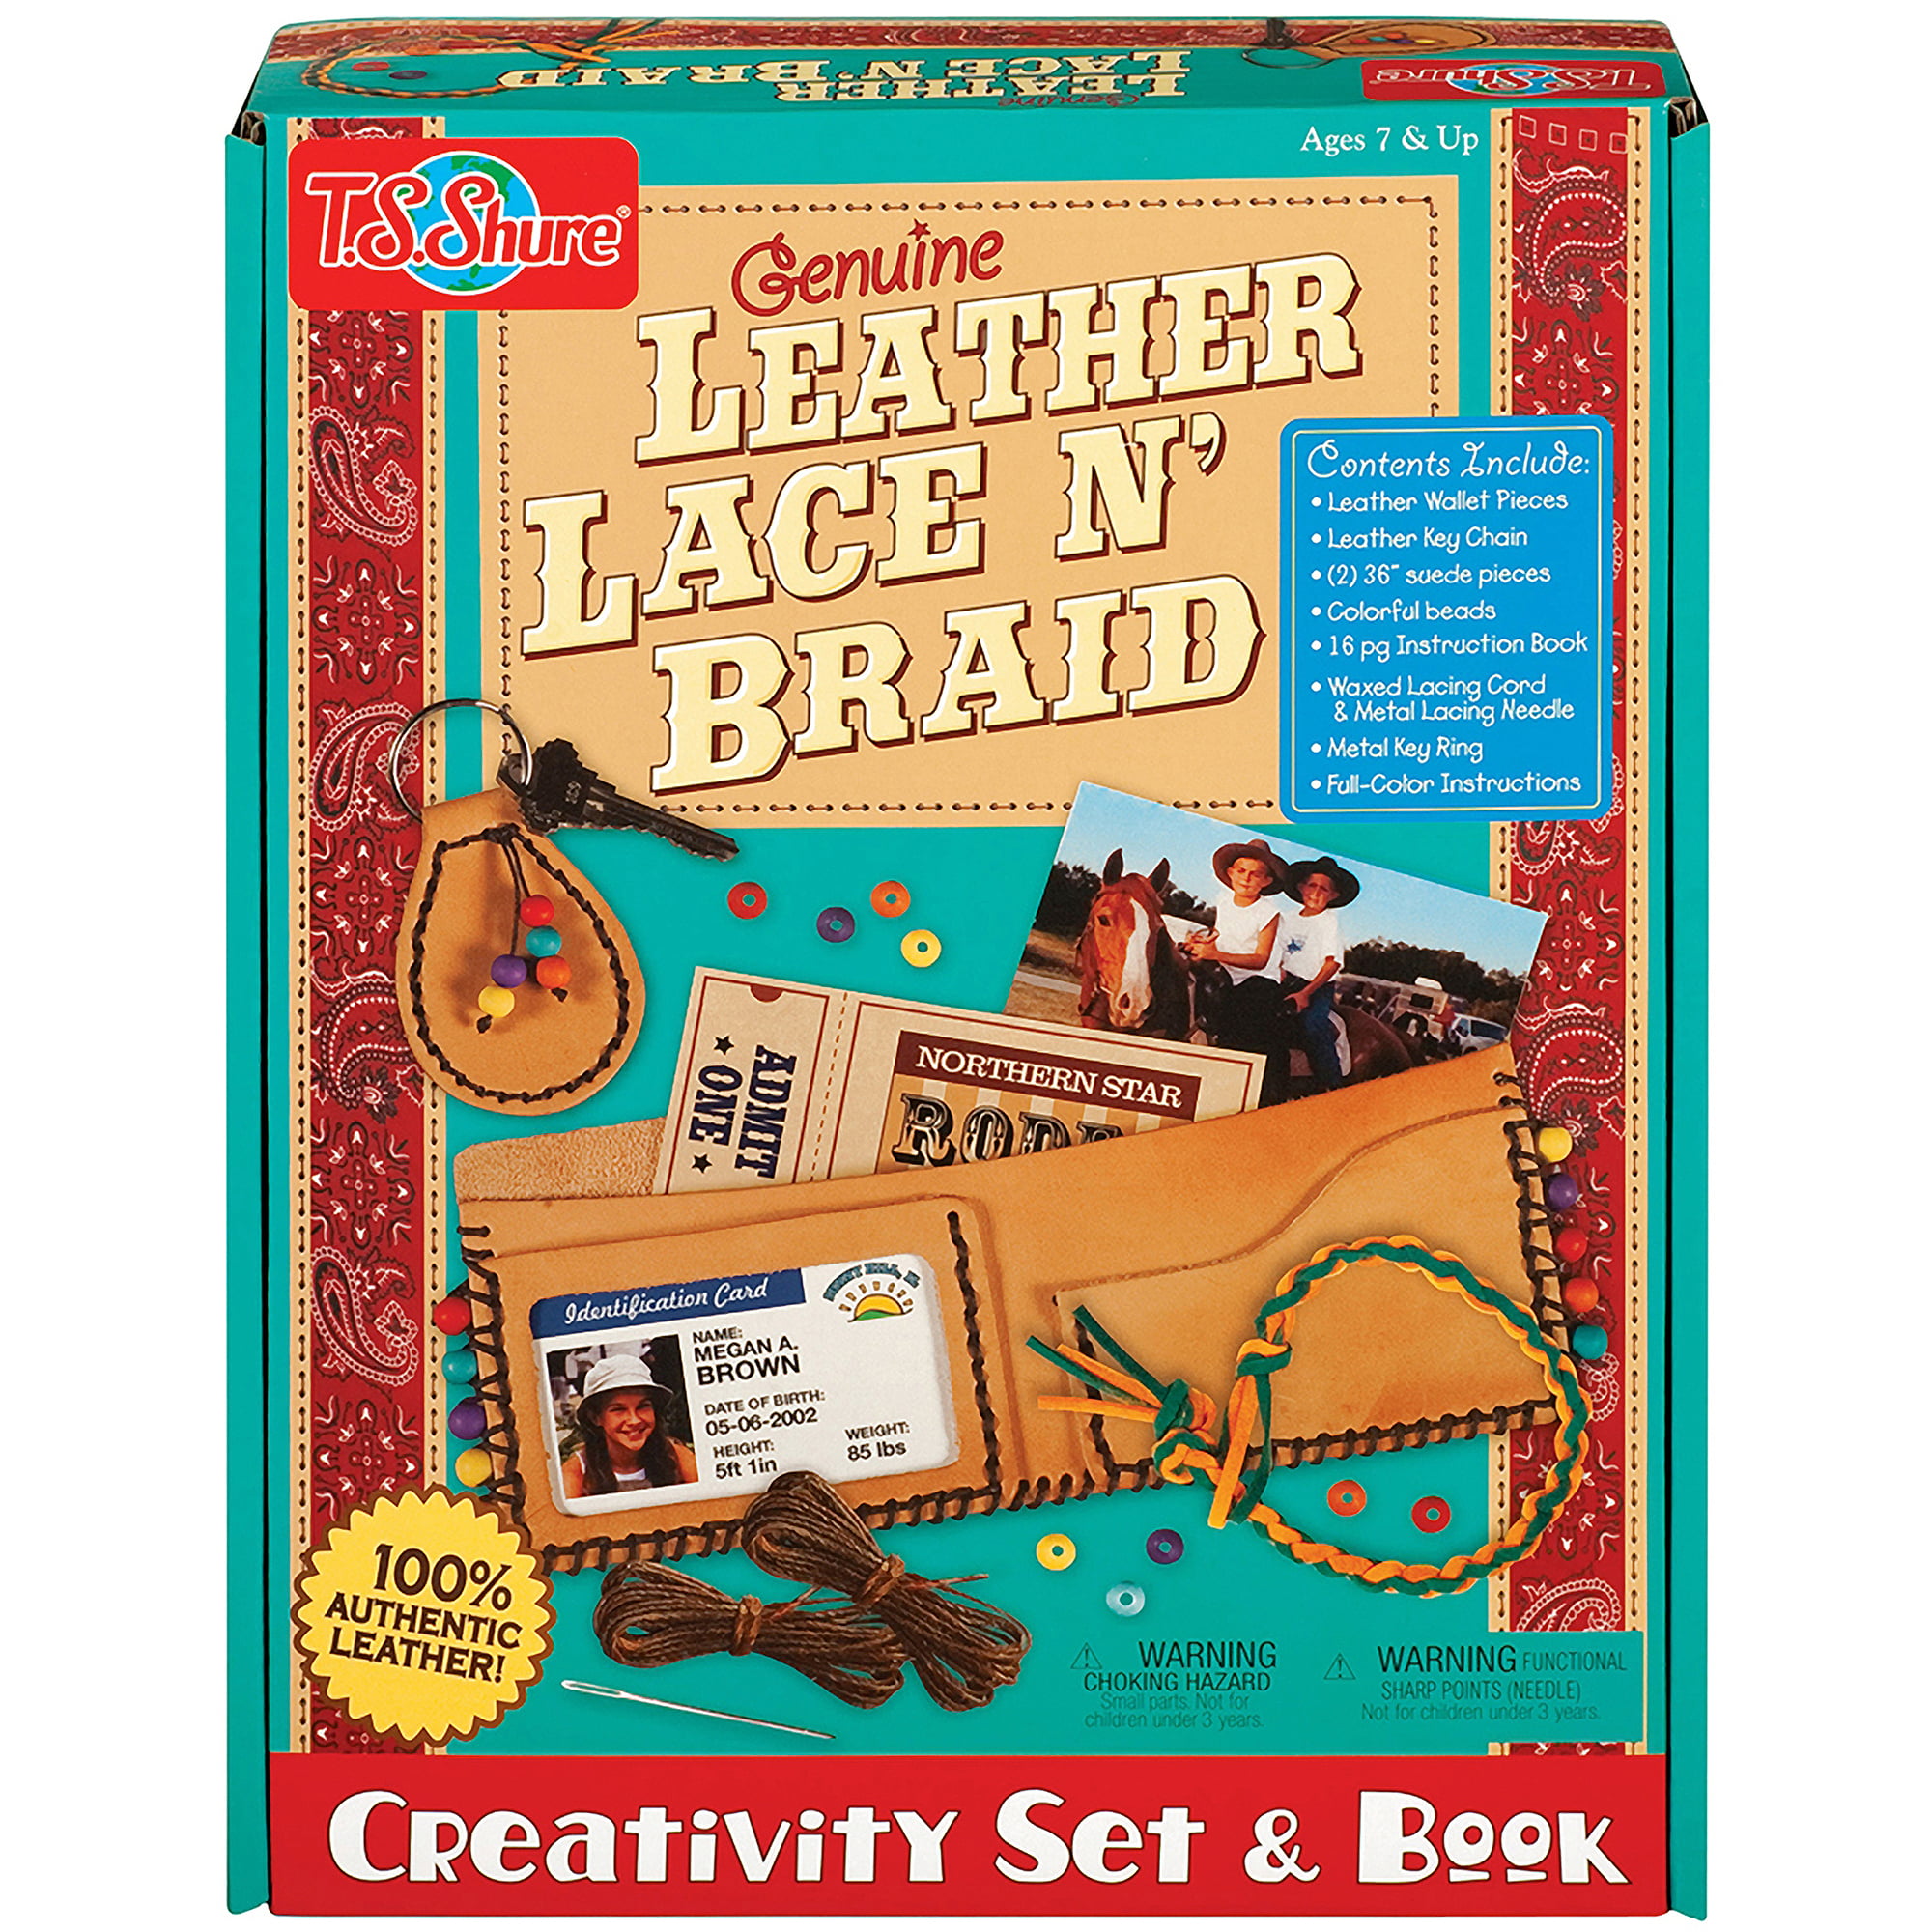 Leather & Lace [Book]